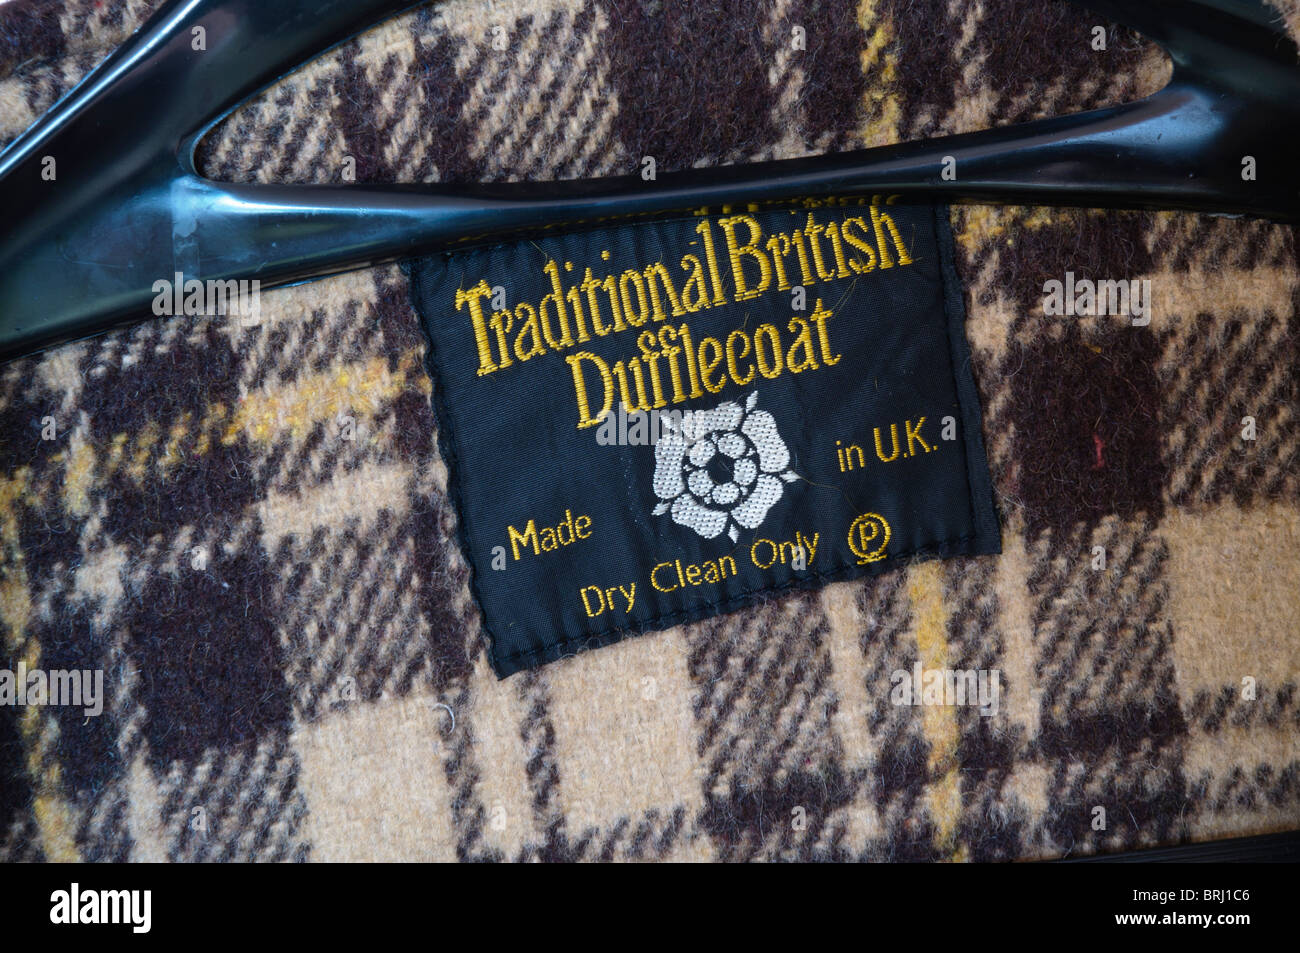 Label of a 'Traditional British Dufflecoat' while hanging on a hanger. Stock Photo